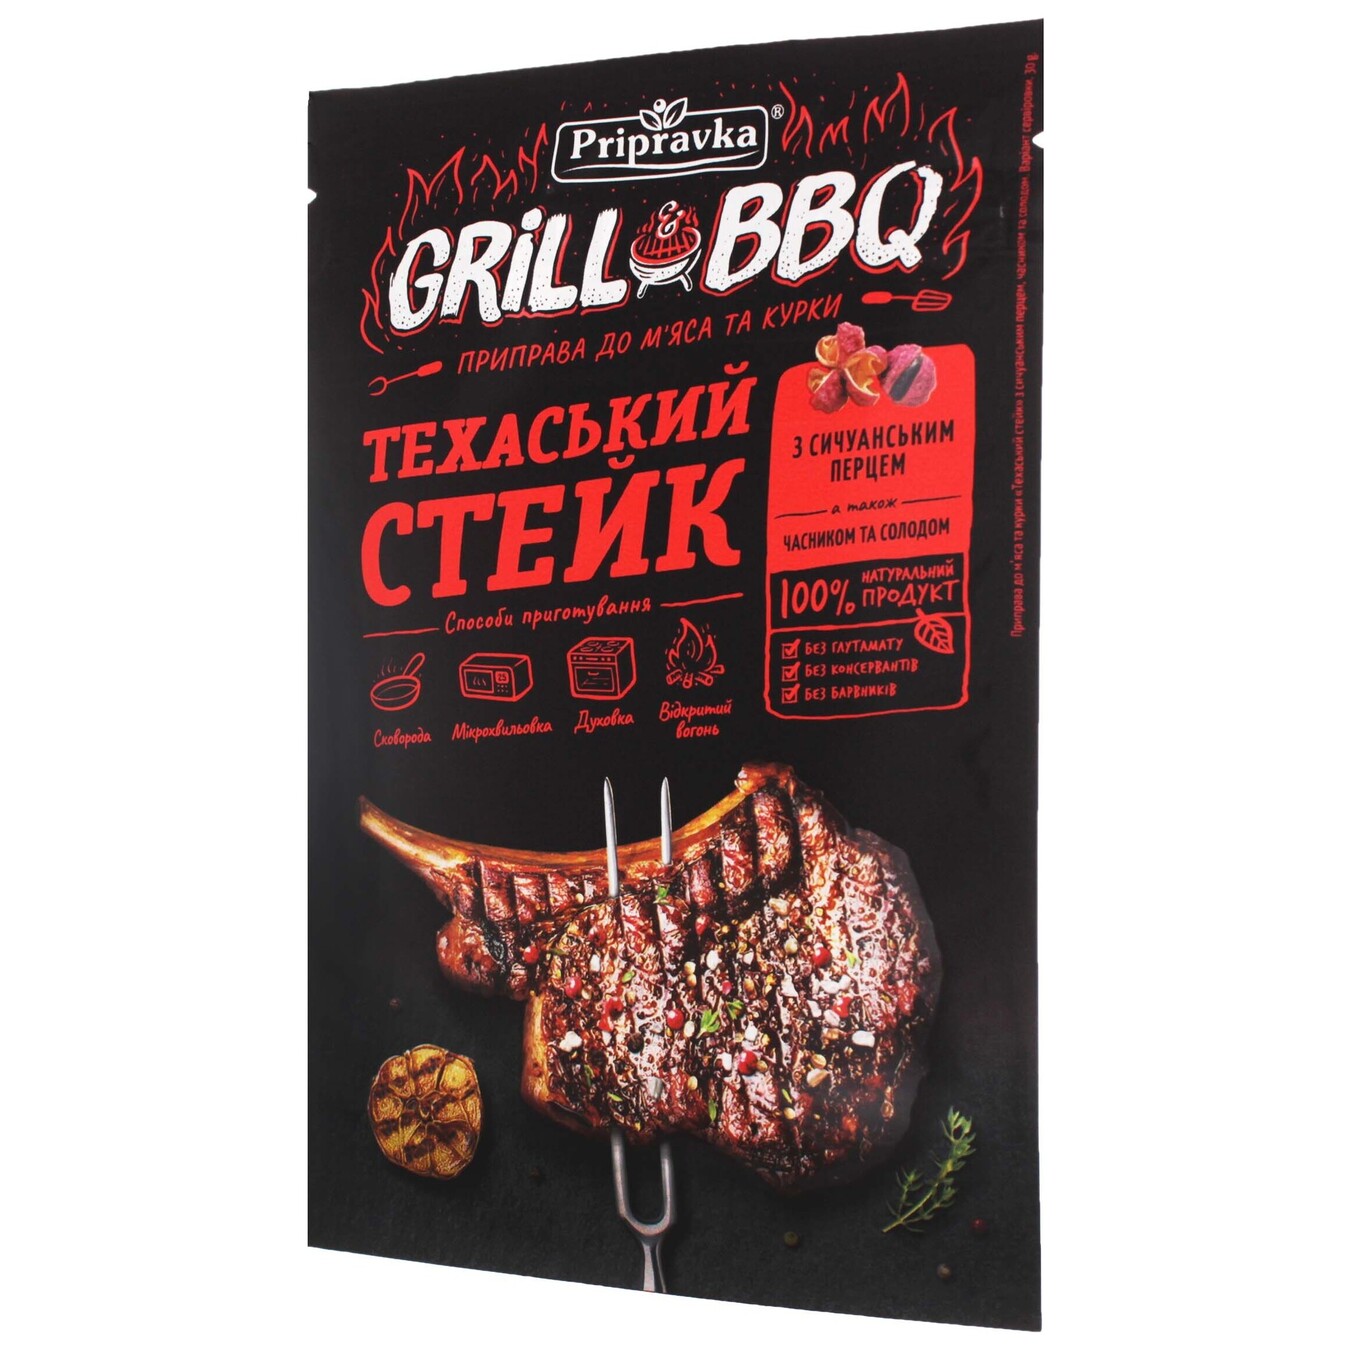 Pripravka Grill & BBQ seasoning for meat and chicken Texas steak with Sichuan pepper, garlic and malt 30g 2